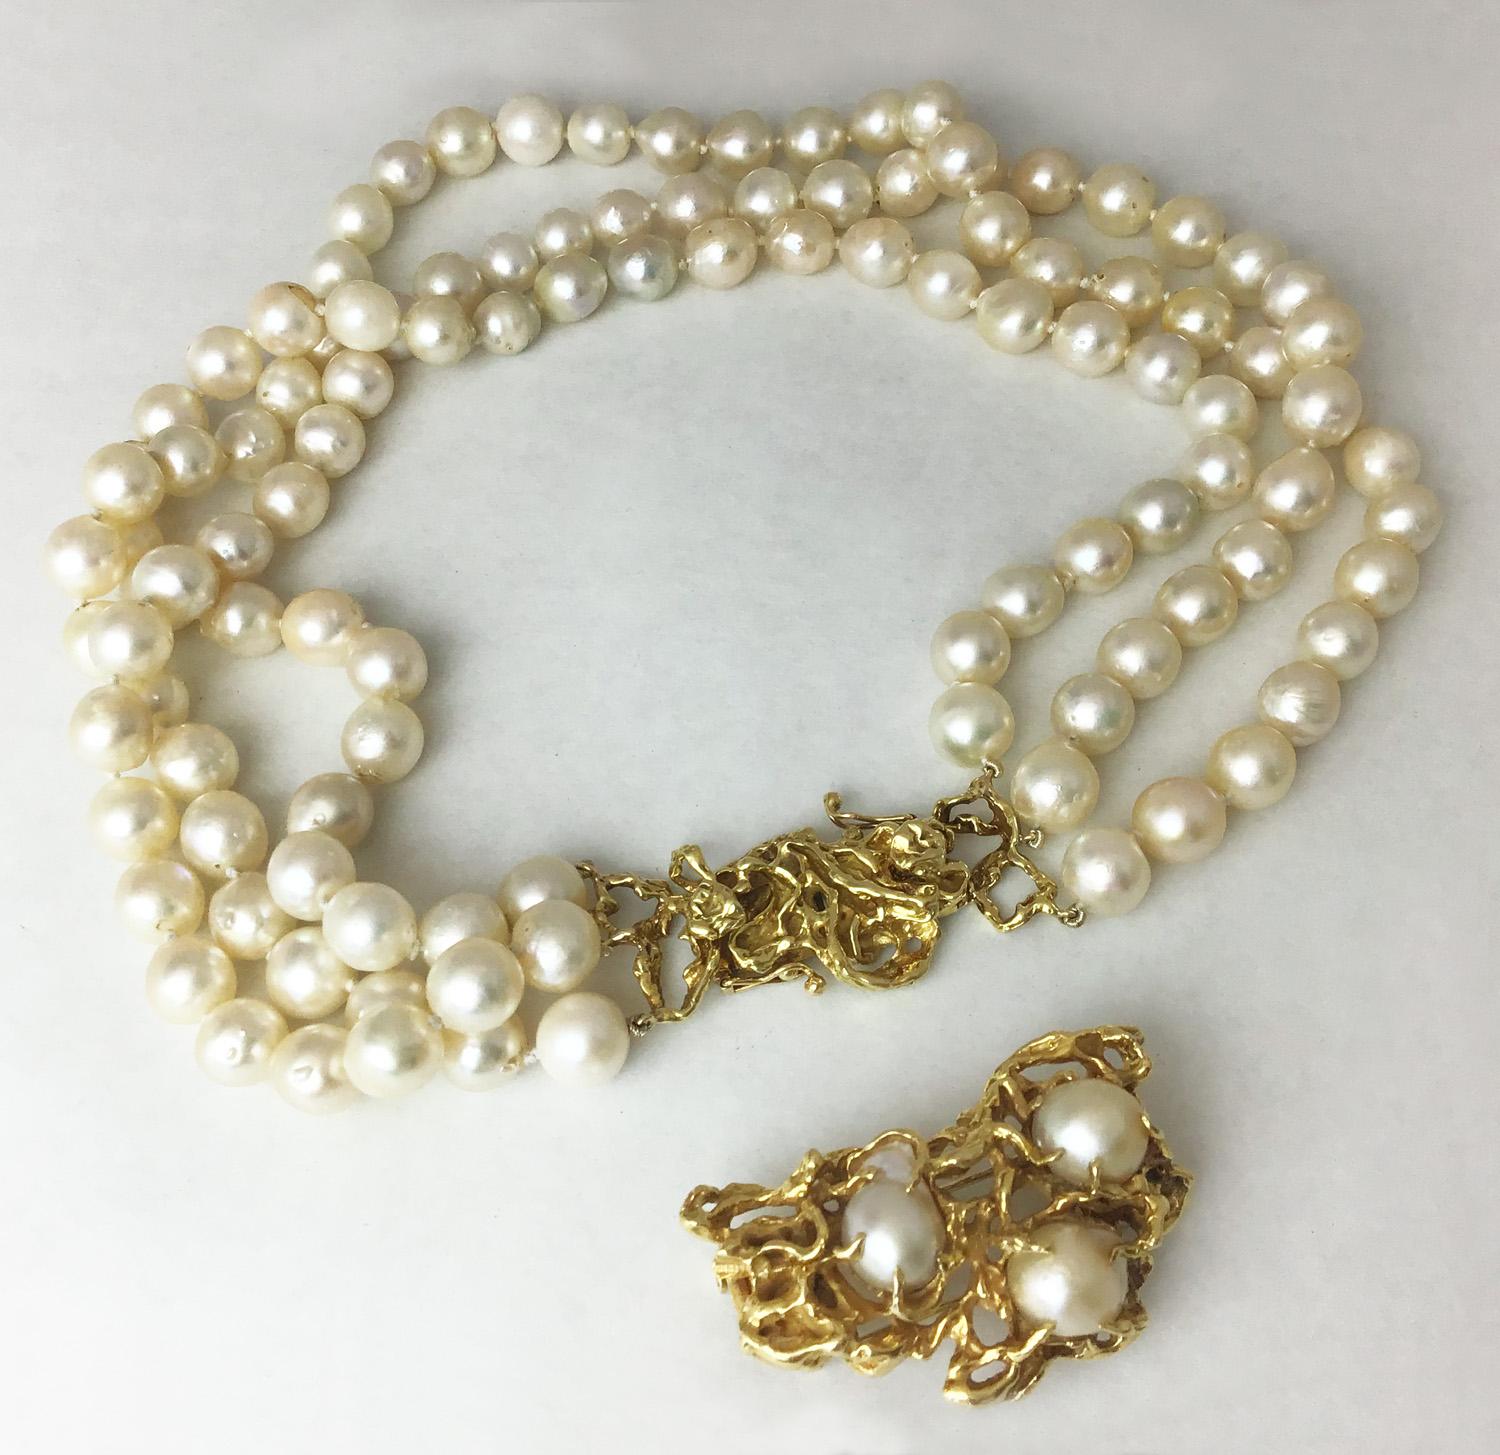 A fabulous three strand pearl necklace set with convertible clasp and brooch in 18K gold made by famous jeweler Arthur King. 

Necklace has two interchangeable clasps. The larger pearl clasp makes it an impressive statement piece, smaller one